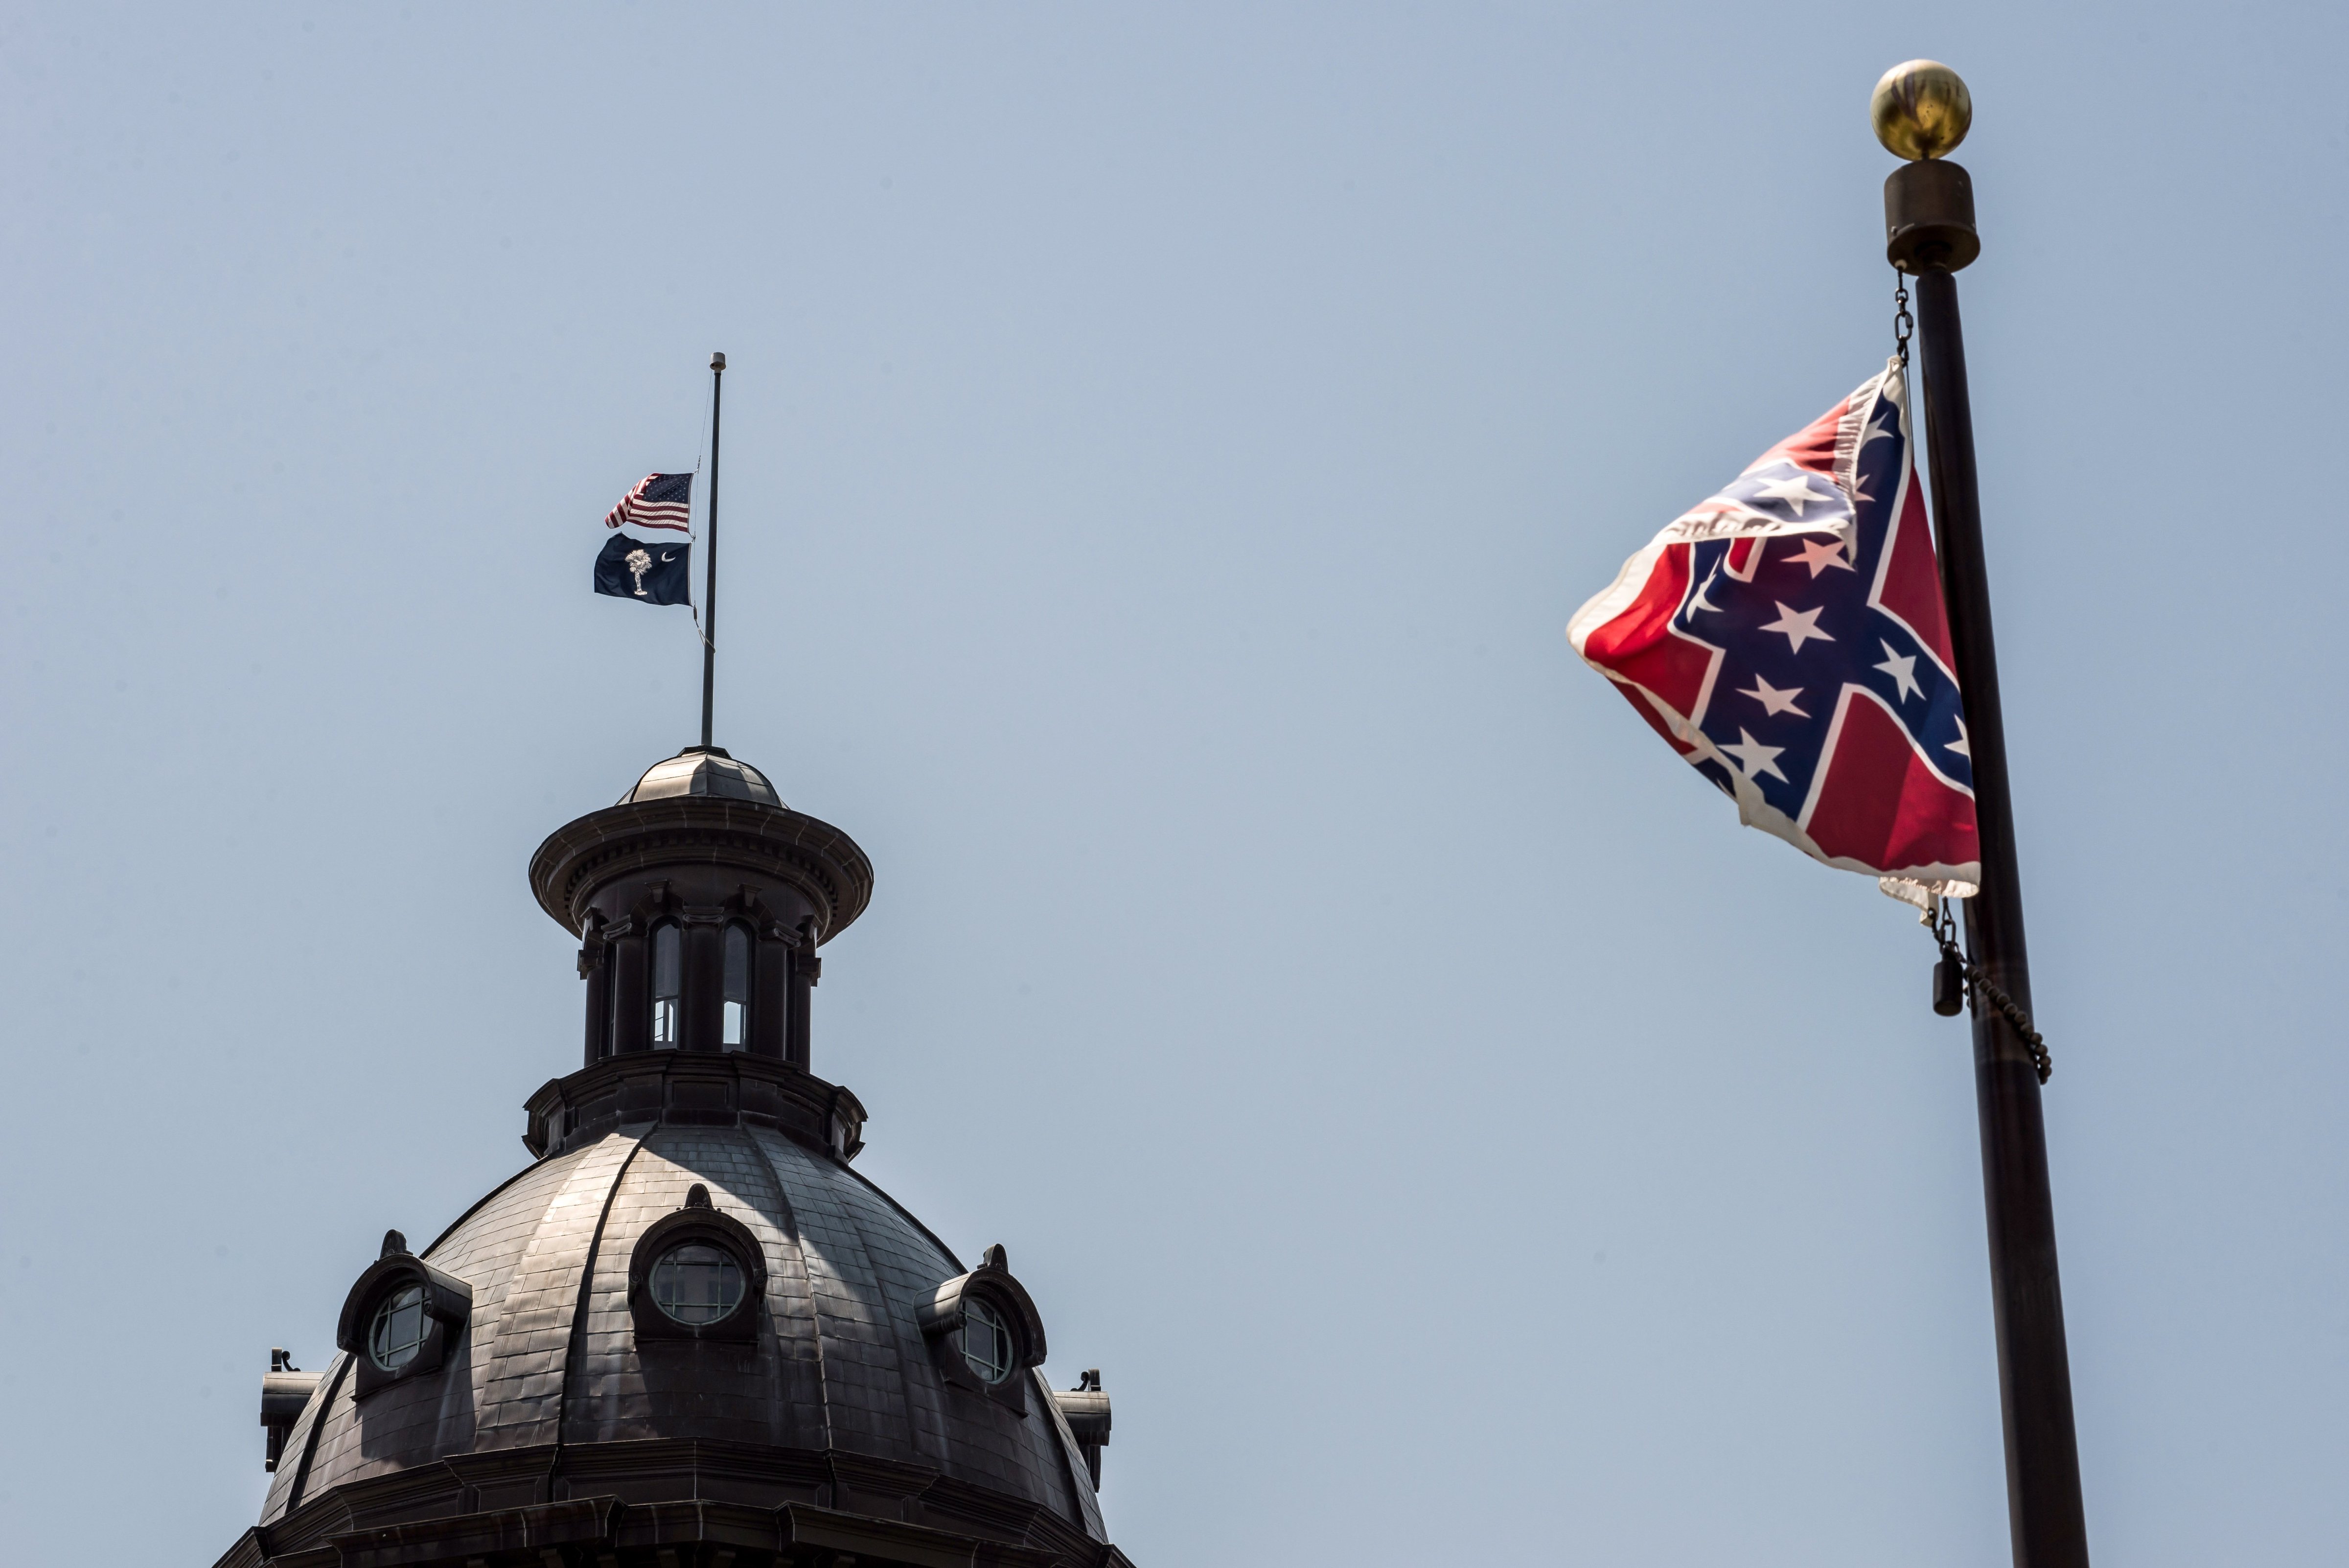 The South Carolina and American flags fly at half mast as the Confederate flag unfurls below at the Confederate Monument June 18, 2015 in Columbia, South Carolina.